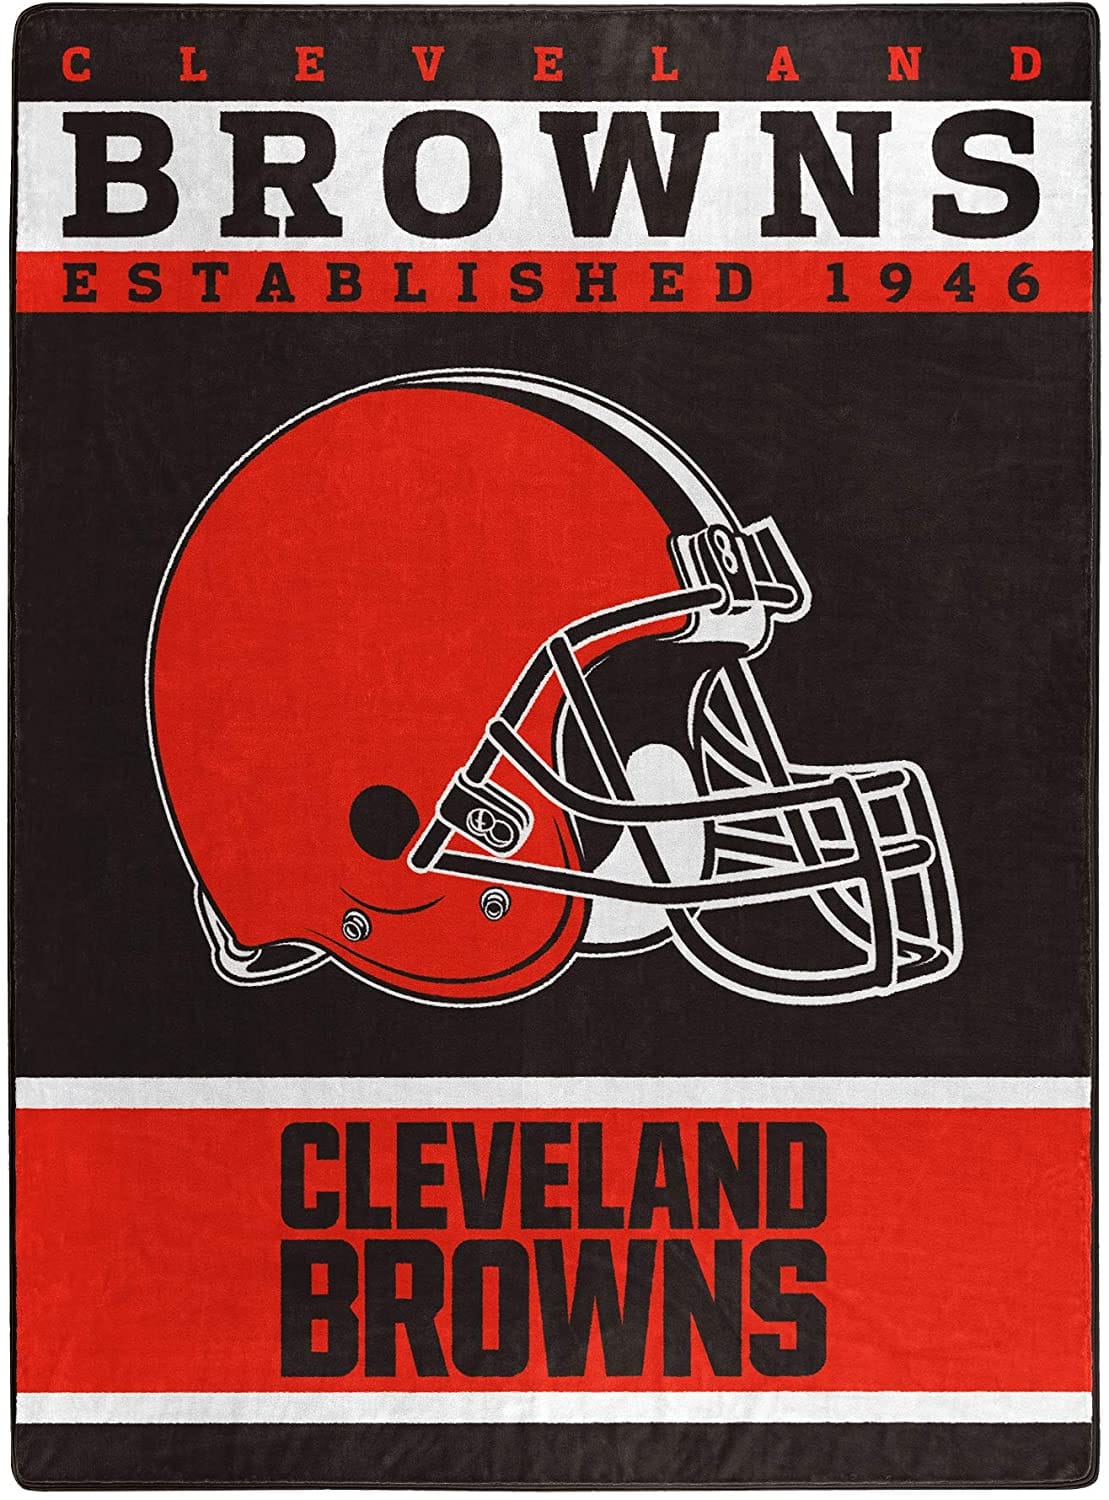 The Officially Licensed Nfl Throw Cleveland Browns Fleece Blanket